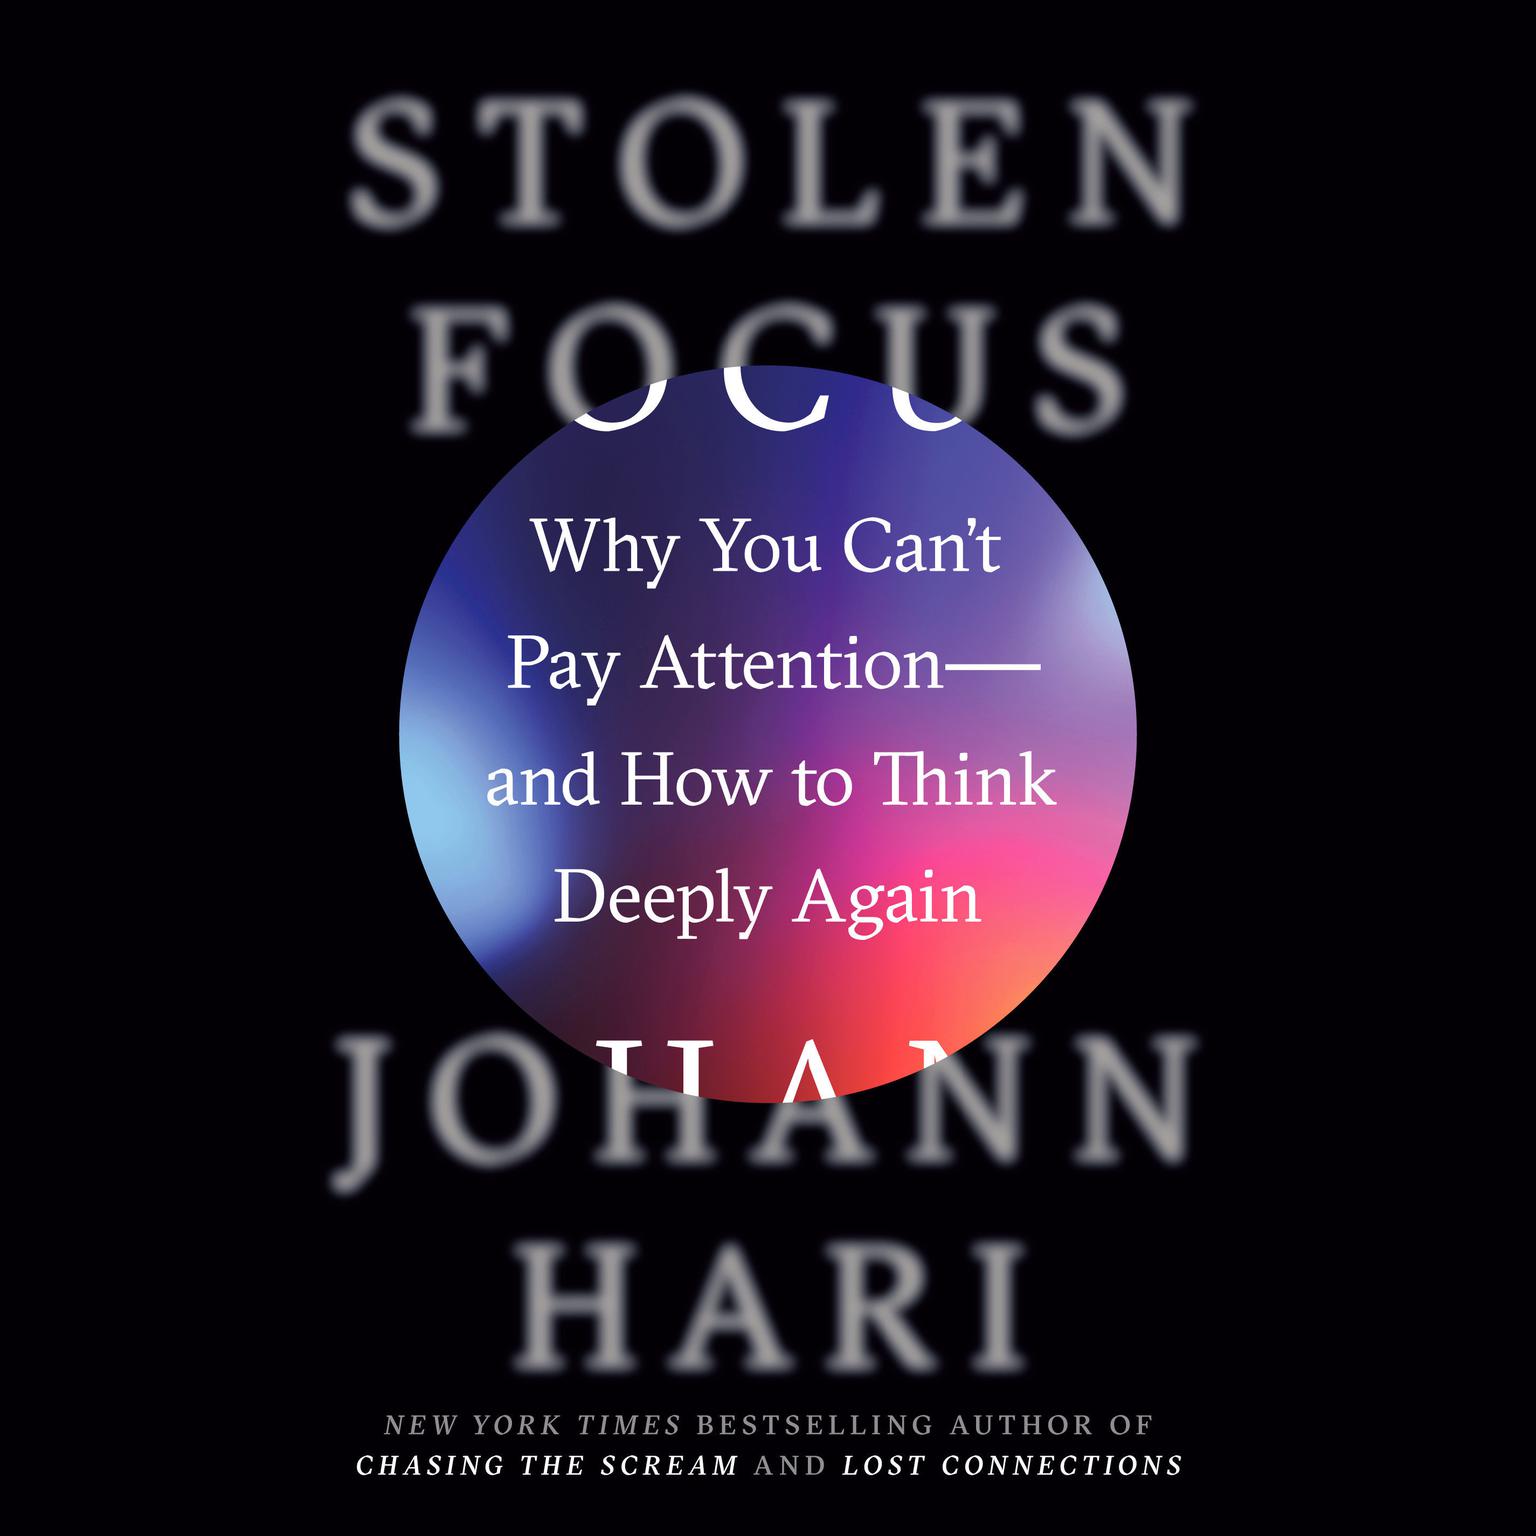 Stolen Focus: Why You Cant Pay Attention--and How to Think Deeply Again Audiobook, by Johann Hari